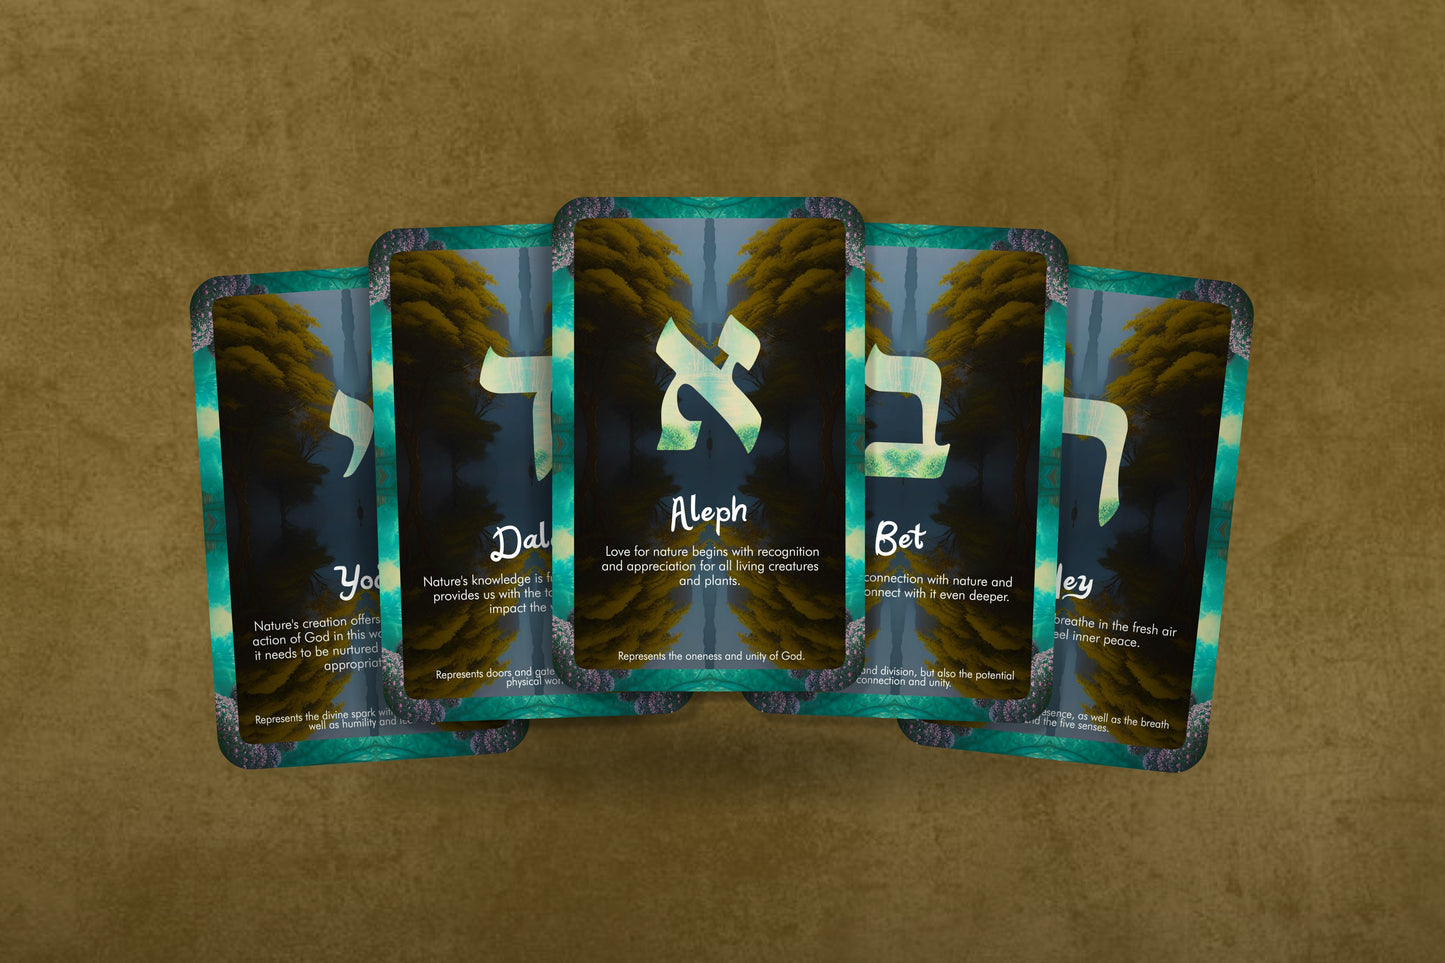 Connecting With Nature - Hebrew Letters of Wisdom